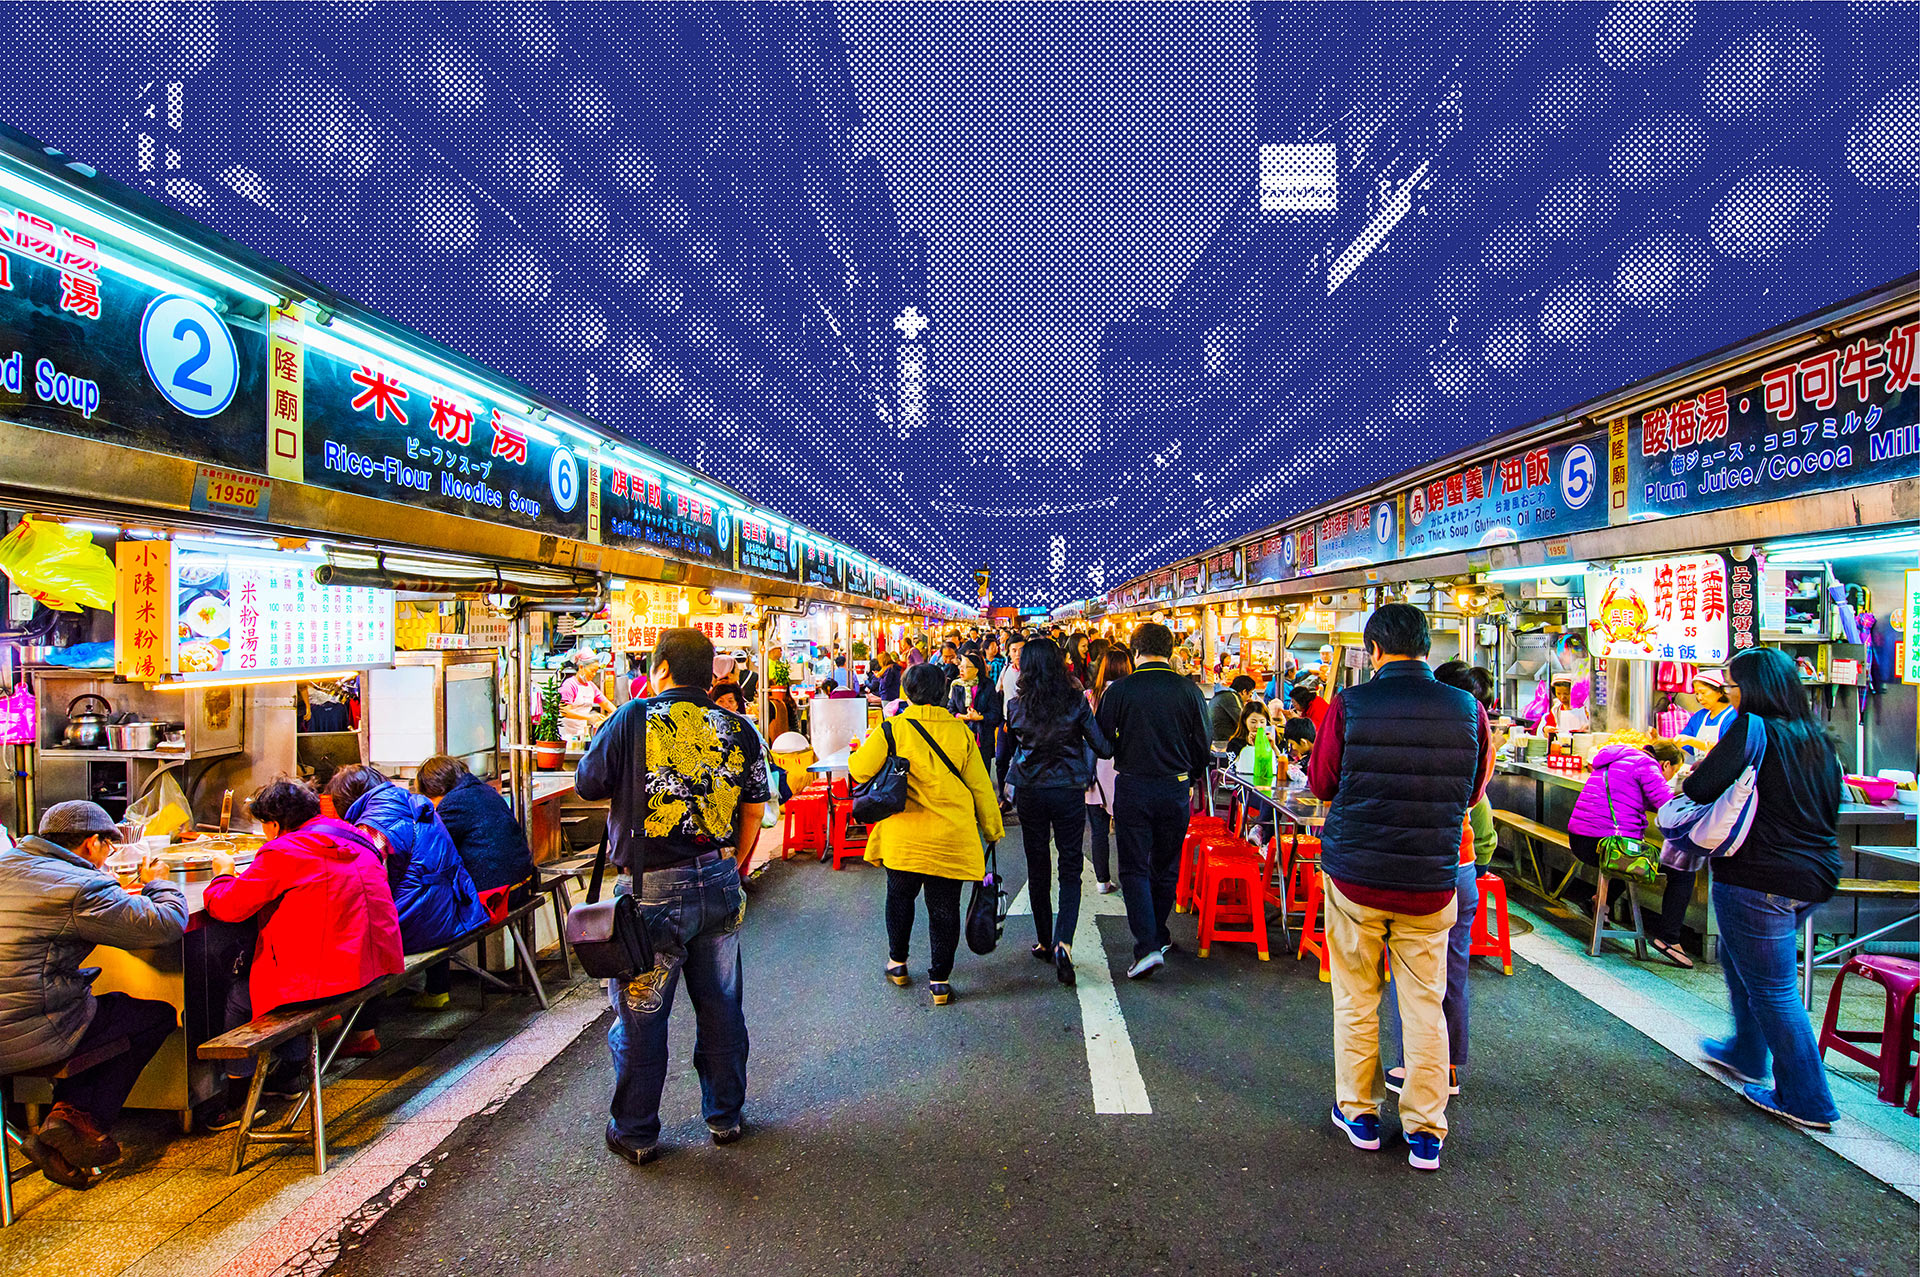 A crowded night market in Taiwan lined with brightly lit food stalls.